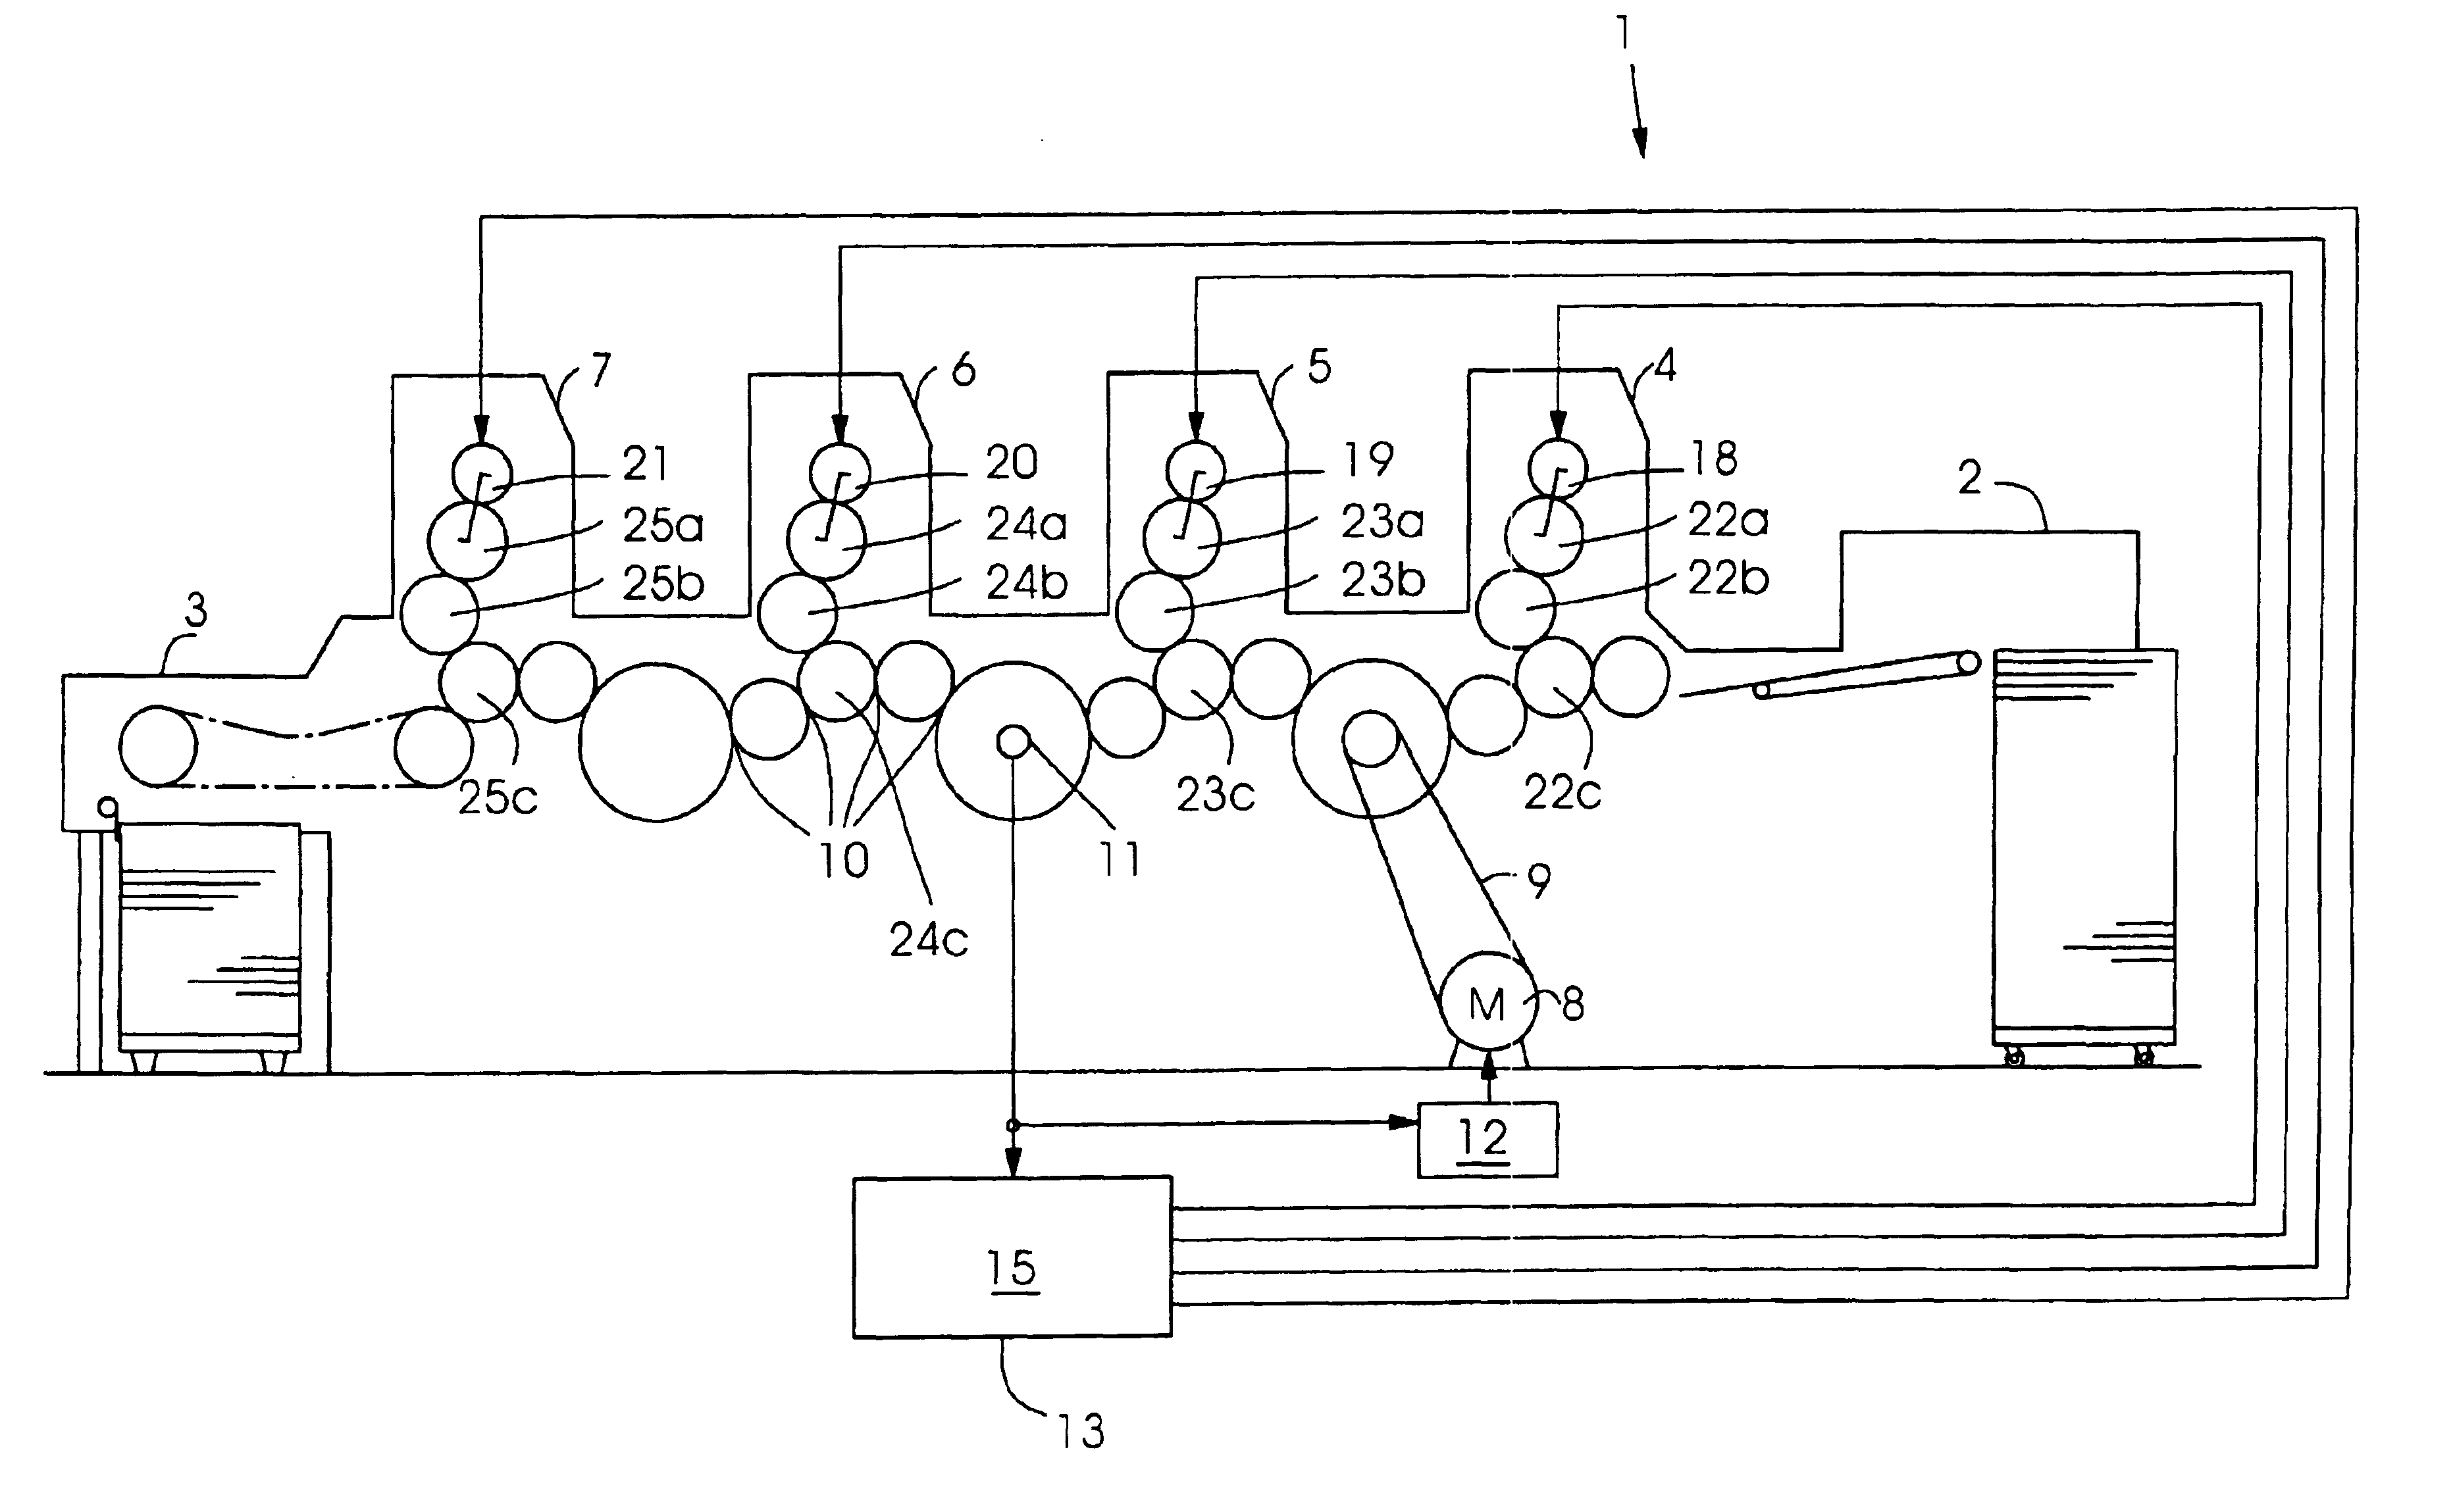 Method of compensating for misregistration during operation of a printing press